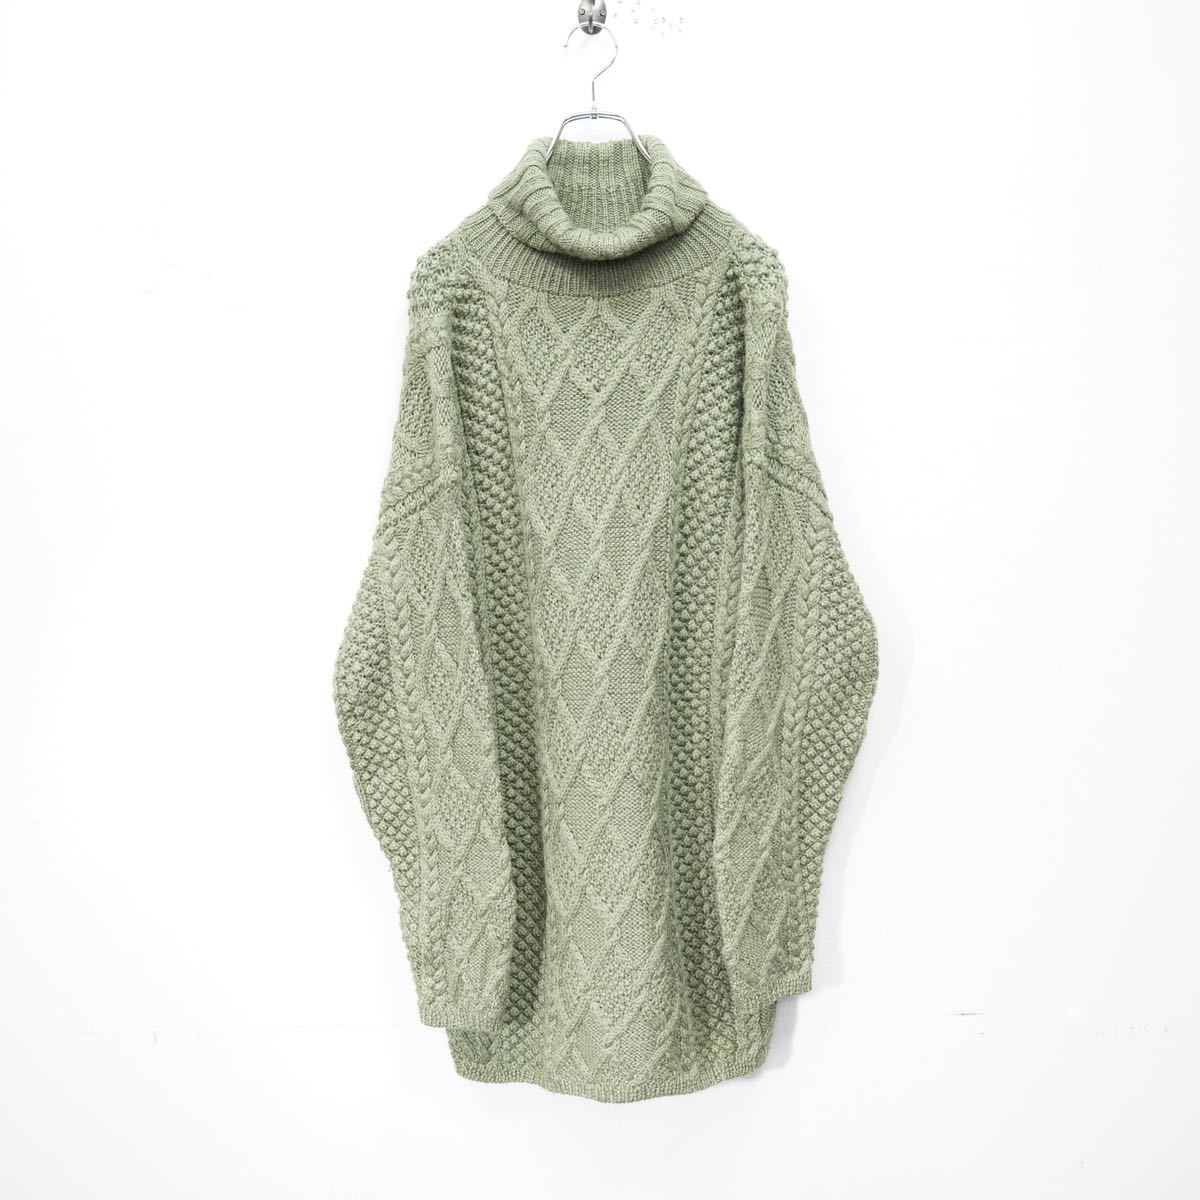 USA VINATGE J.CREW CABLE DESIGN HIGH NECK KNIT ONE PIECE/アメリカ古着ケーブルデザインハイネックニットワンピース_画像4